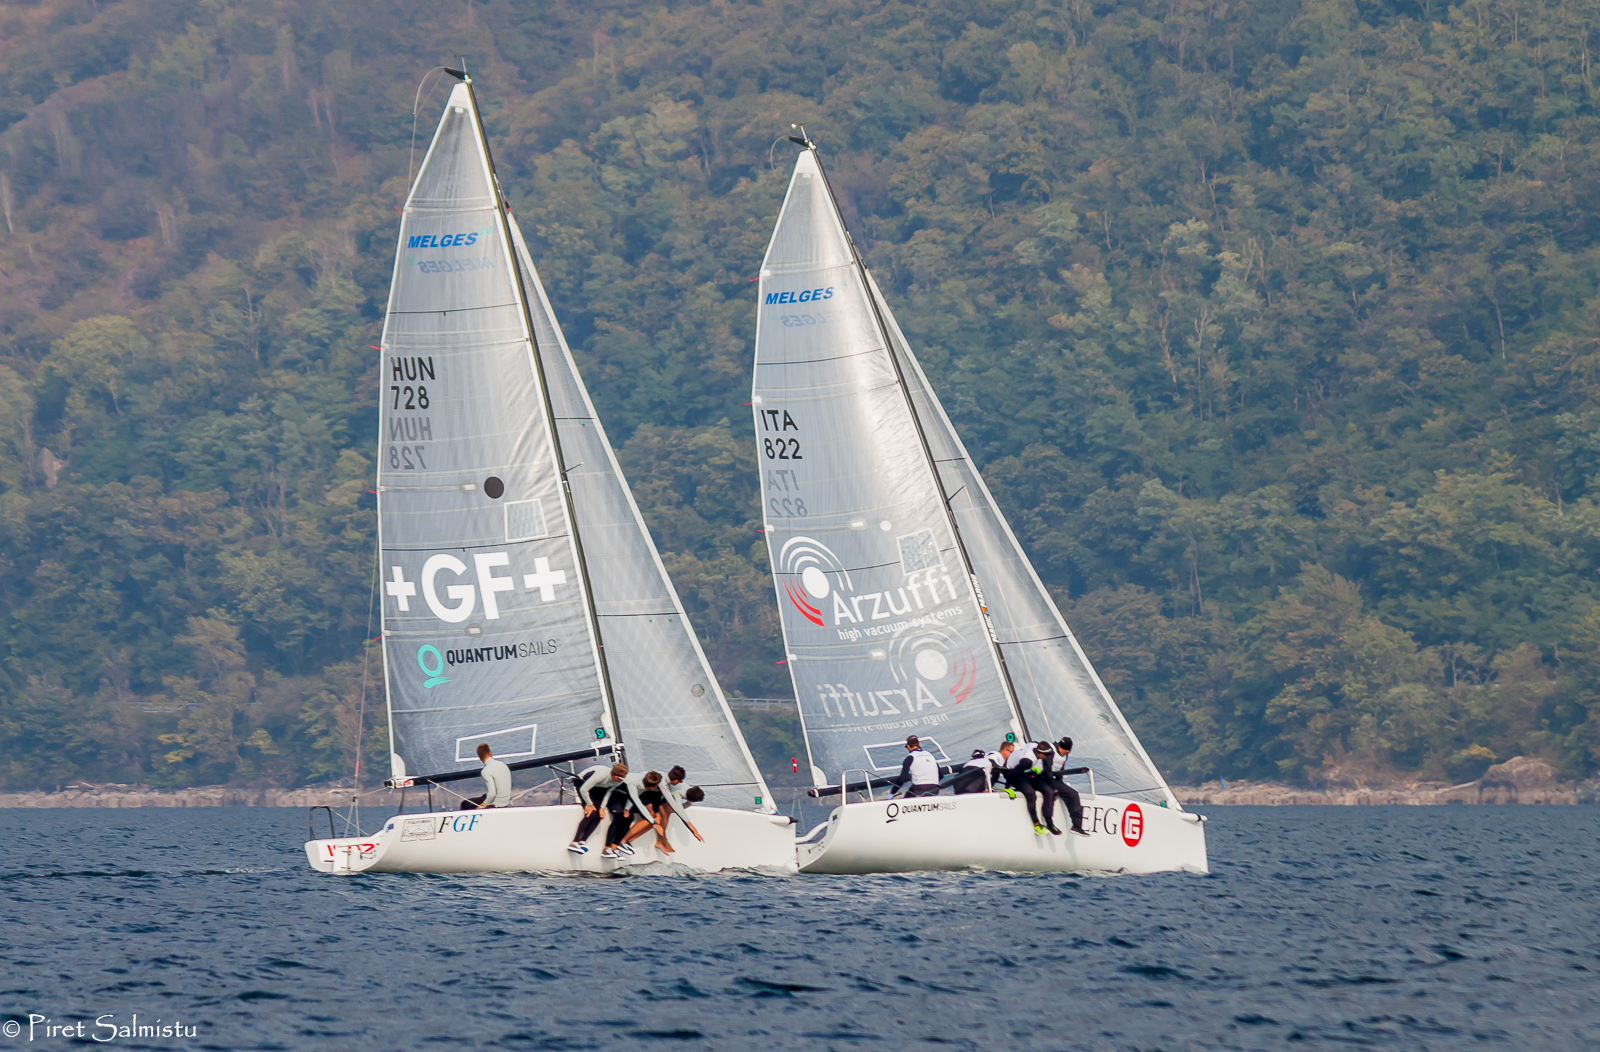 EFG with Carlo Fracassoli in helm and FGF Sailing Team with Robert Bakoczy